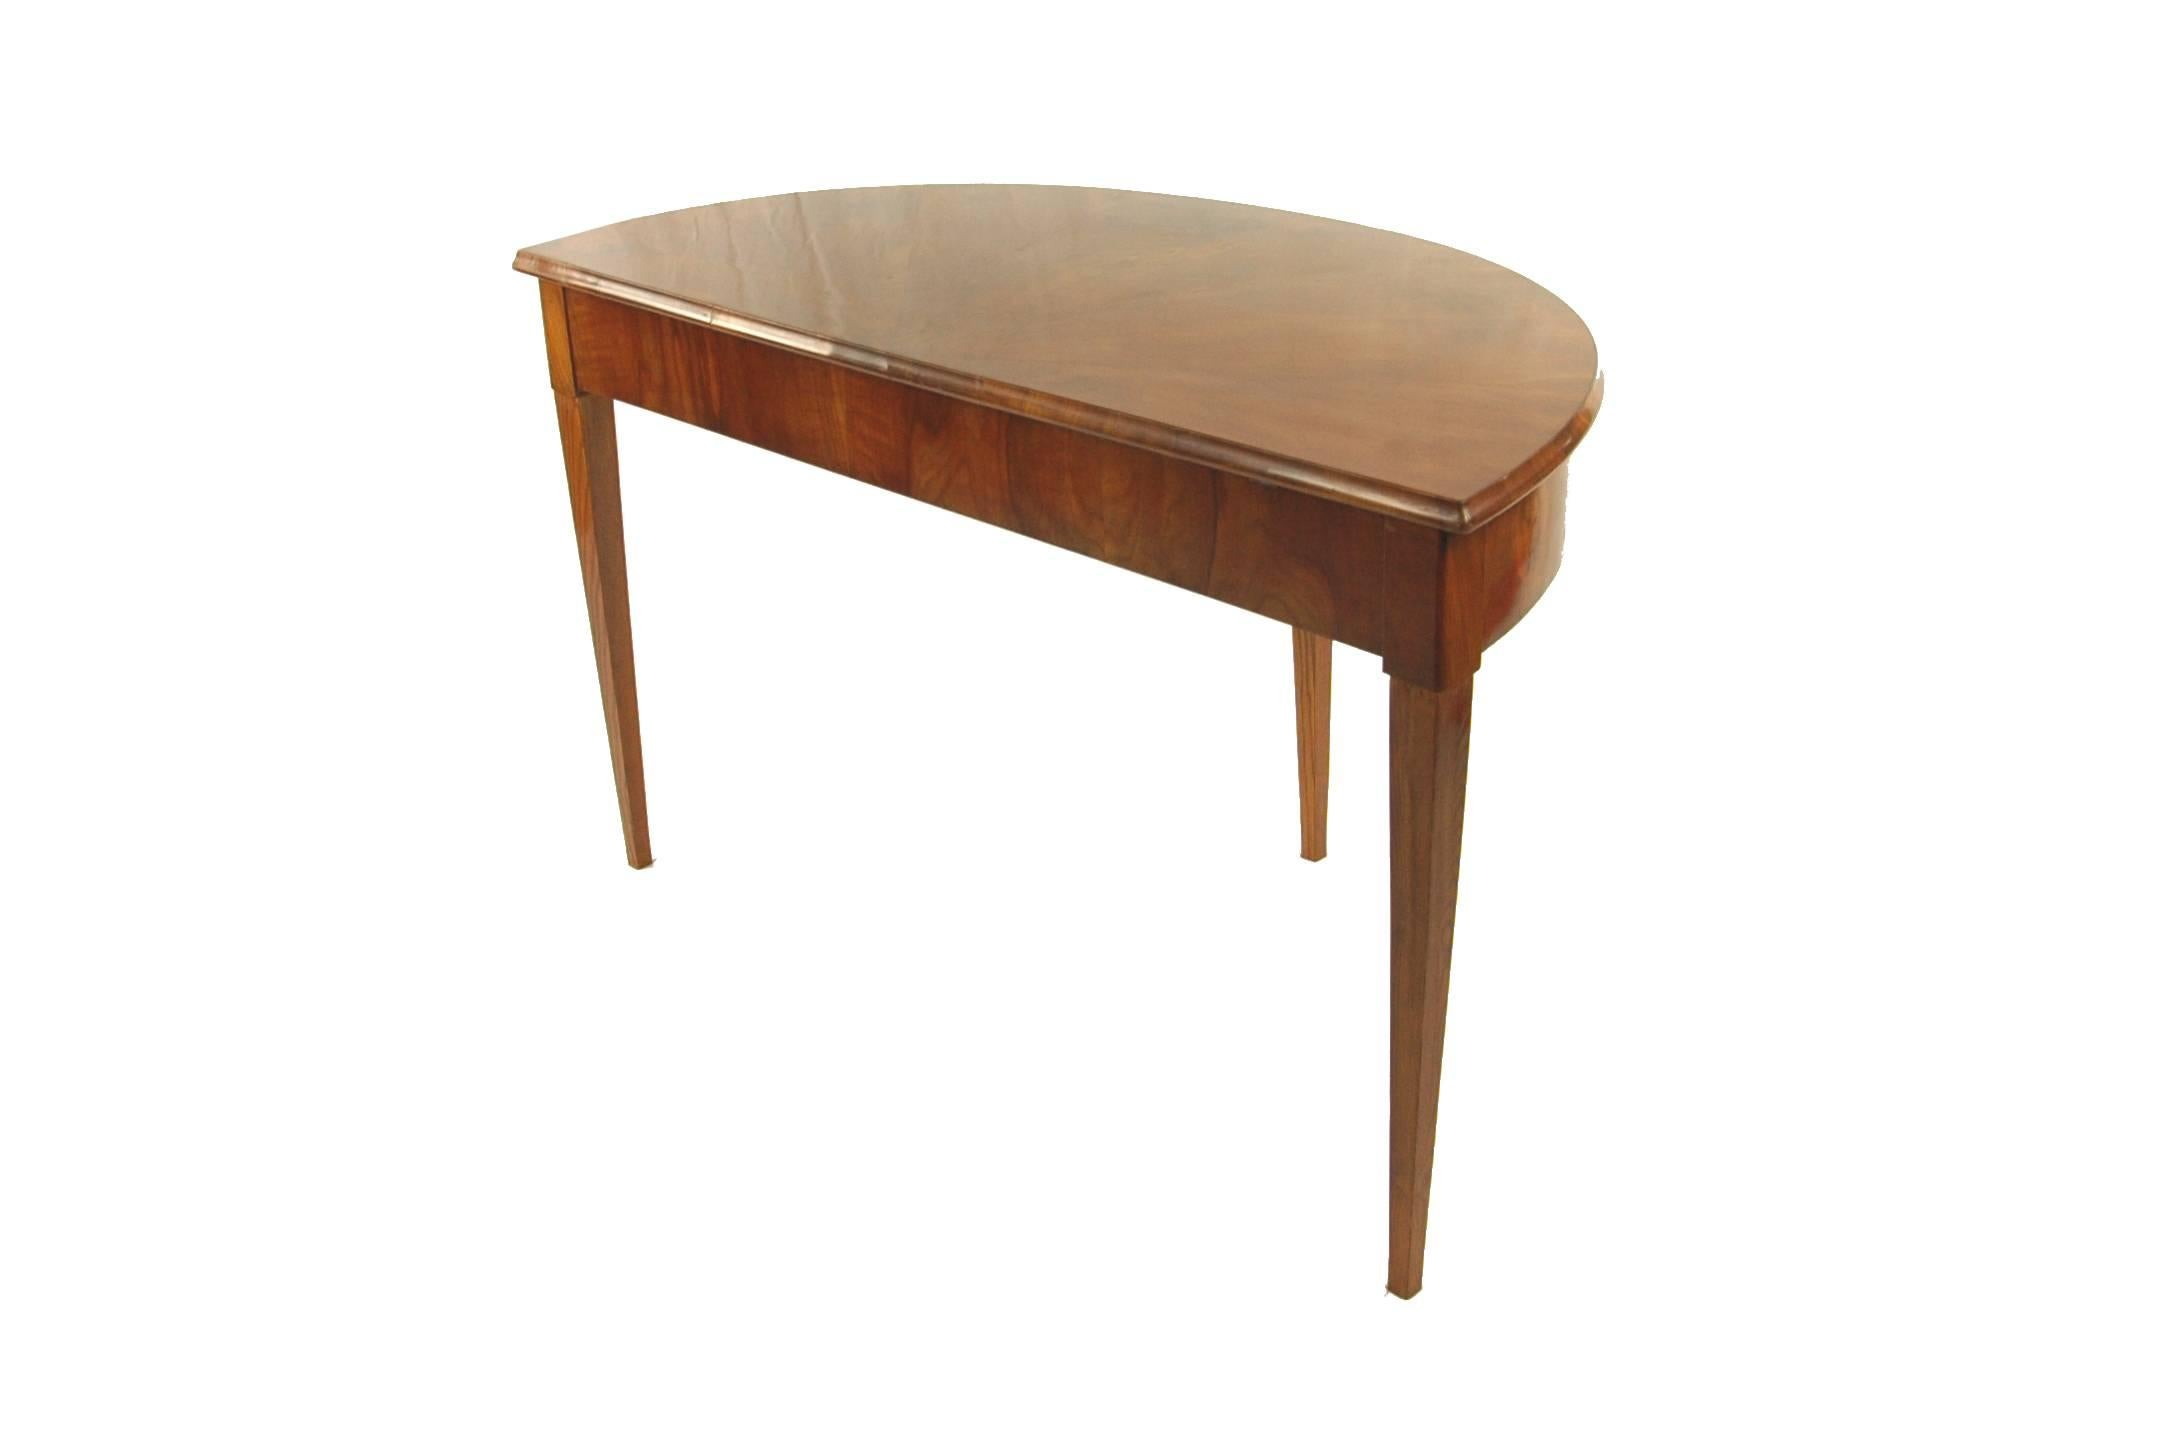 Console table, Biedermeier period, circa 1820
Cherry tree massively and veneered
Record with star veneer
Openable, inside with two fields
Lockable
Restored state
French shellac hand polish
Measures: Height 77 cm, width 127 cm, depth 64